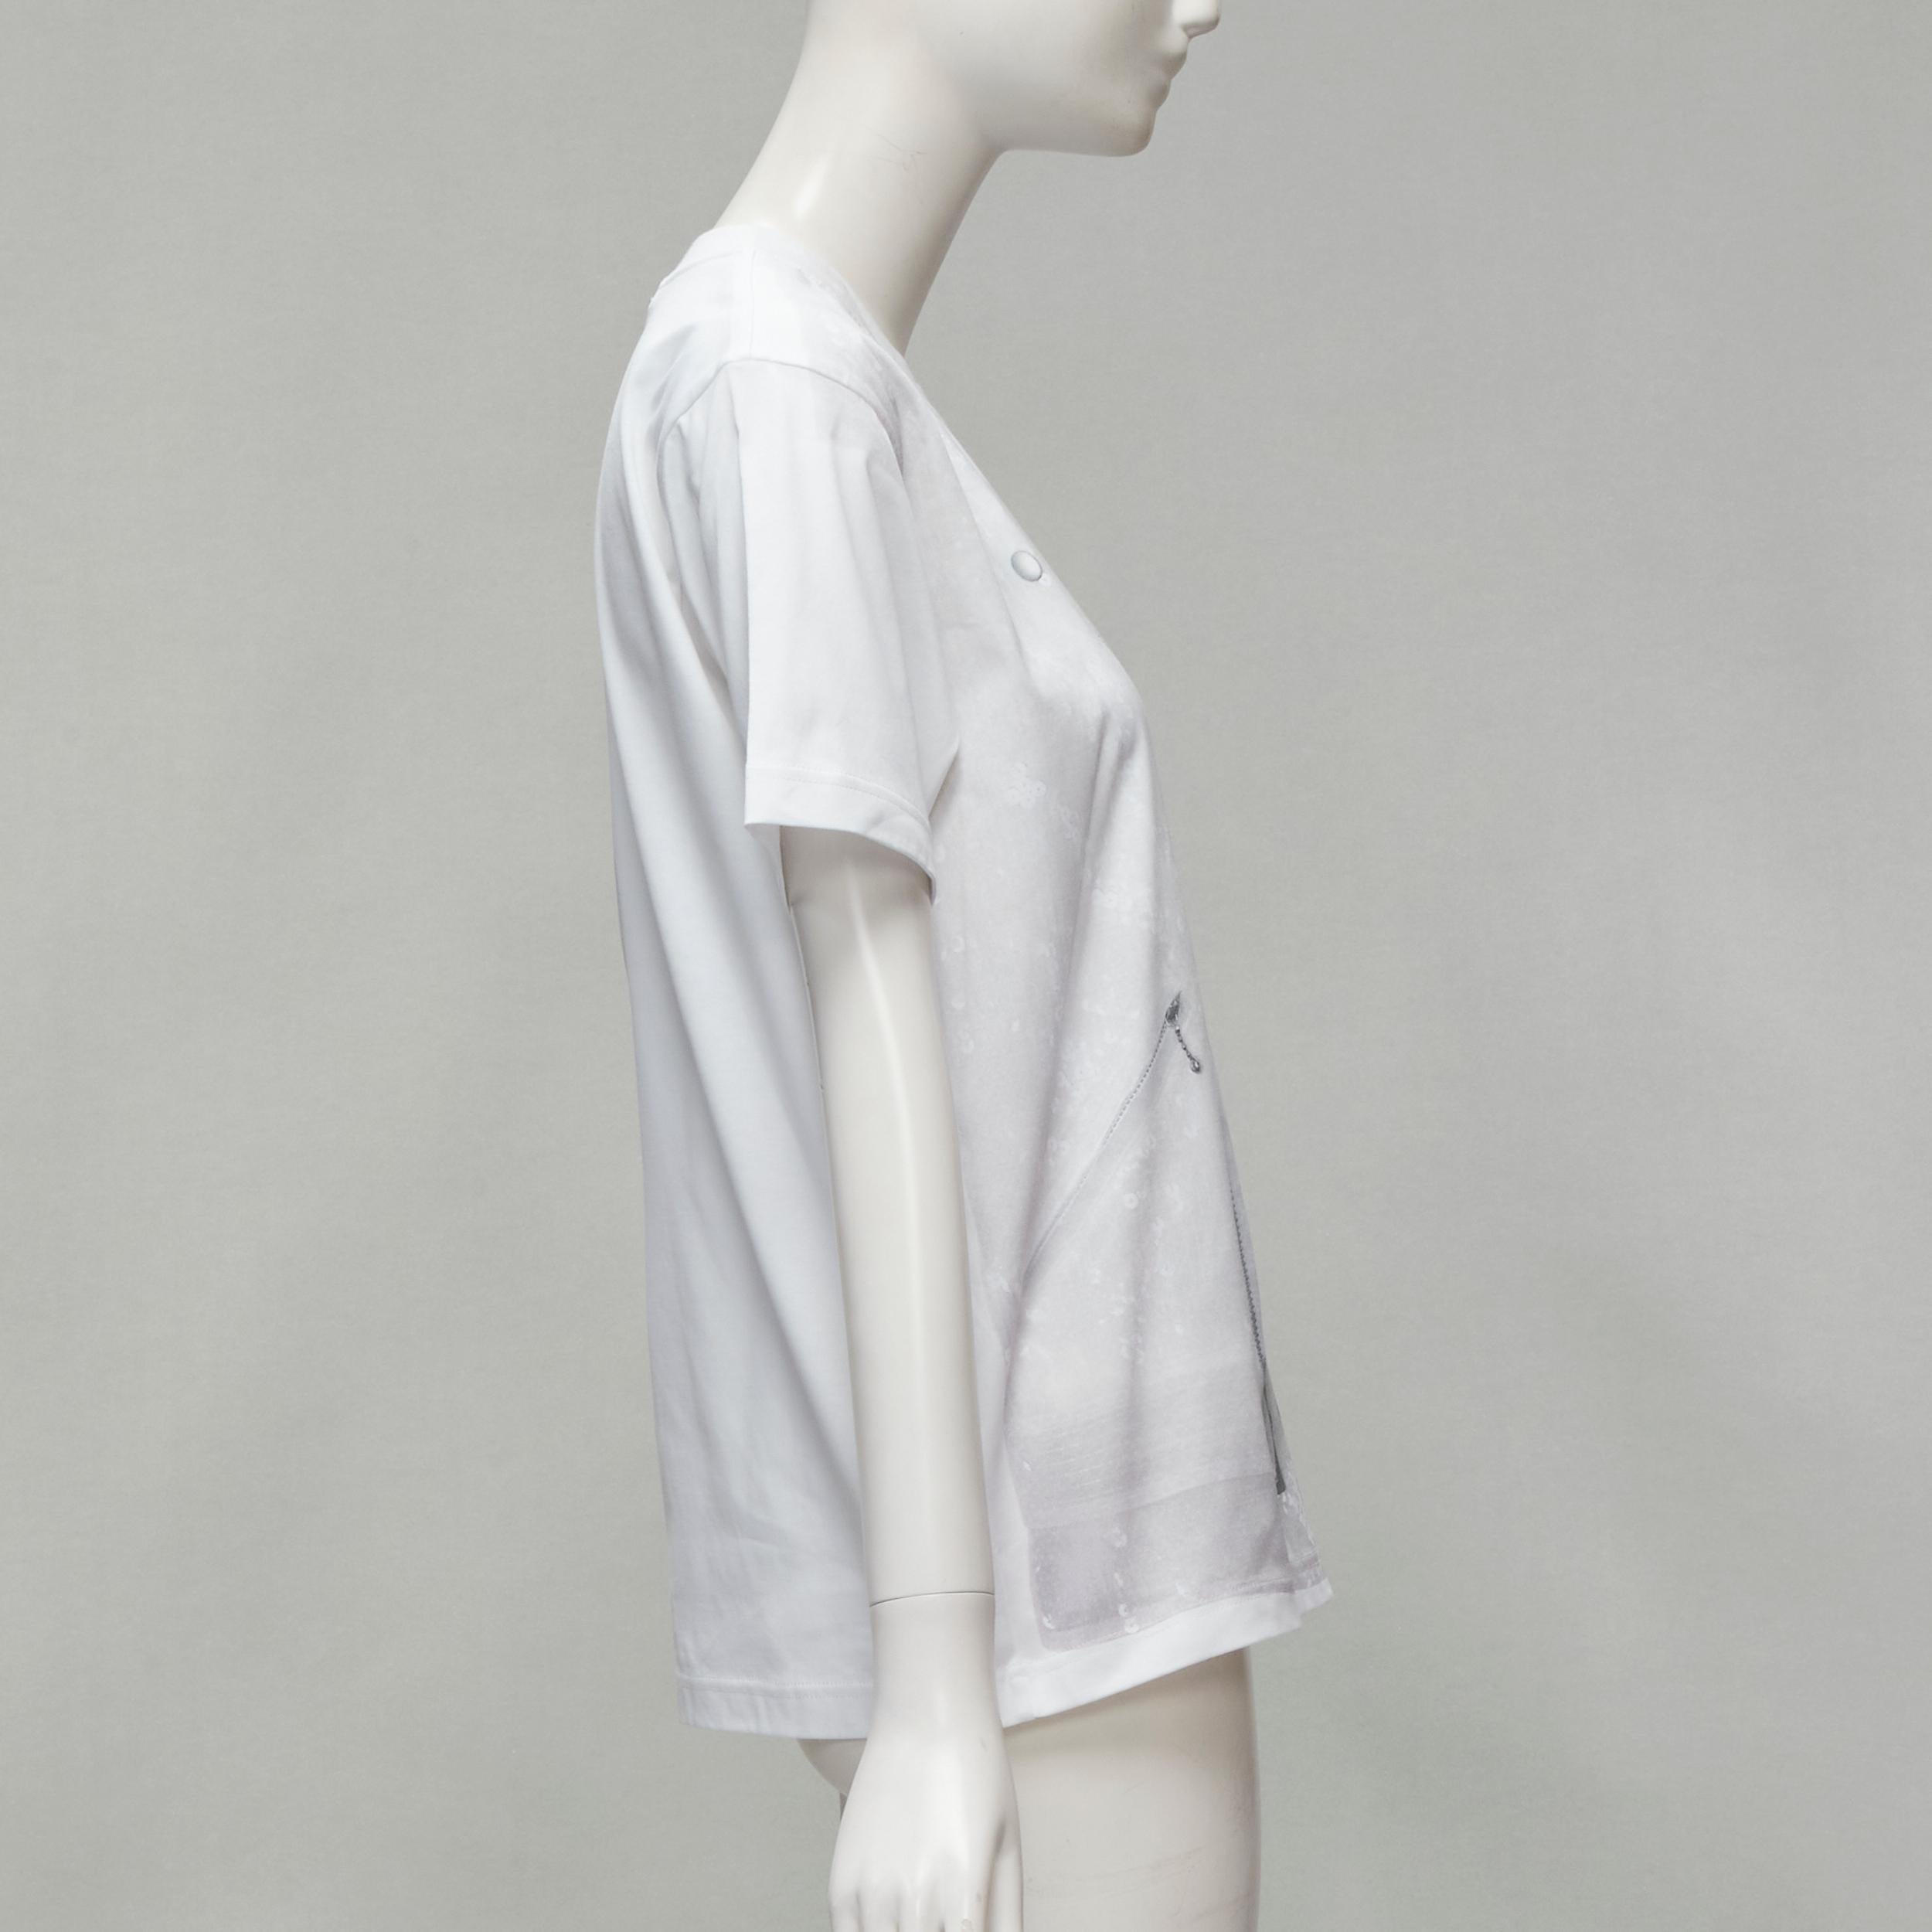 JUNYA WATANABE 2020 grey sequin biker print white cotton tshirt top S In Excellent Condition For Sale In Hong Kong, NT